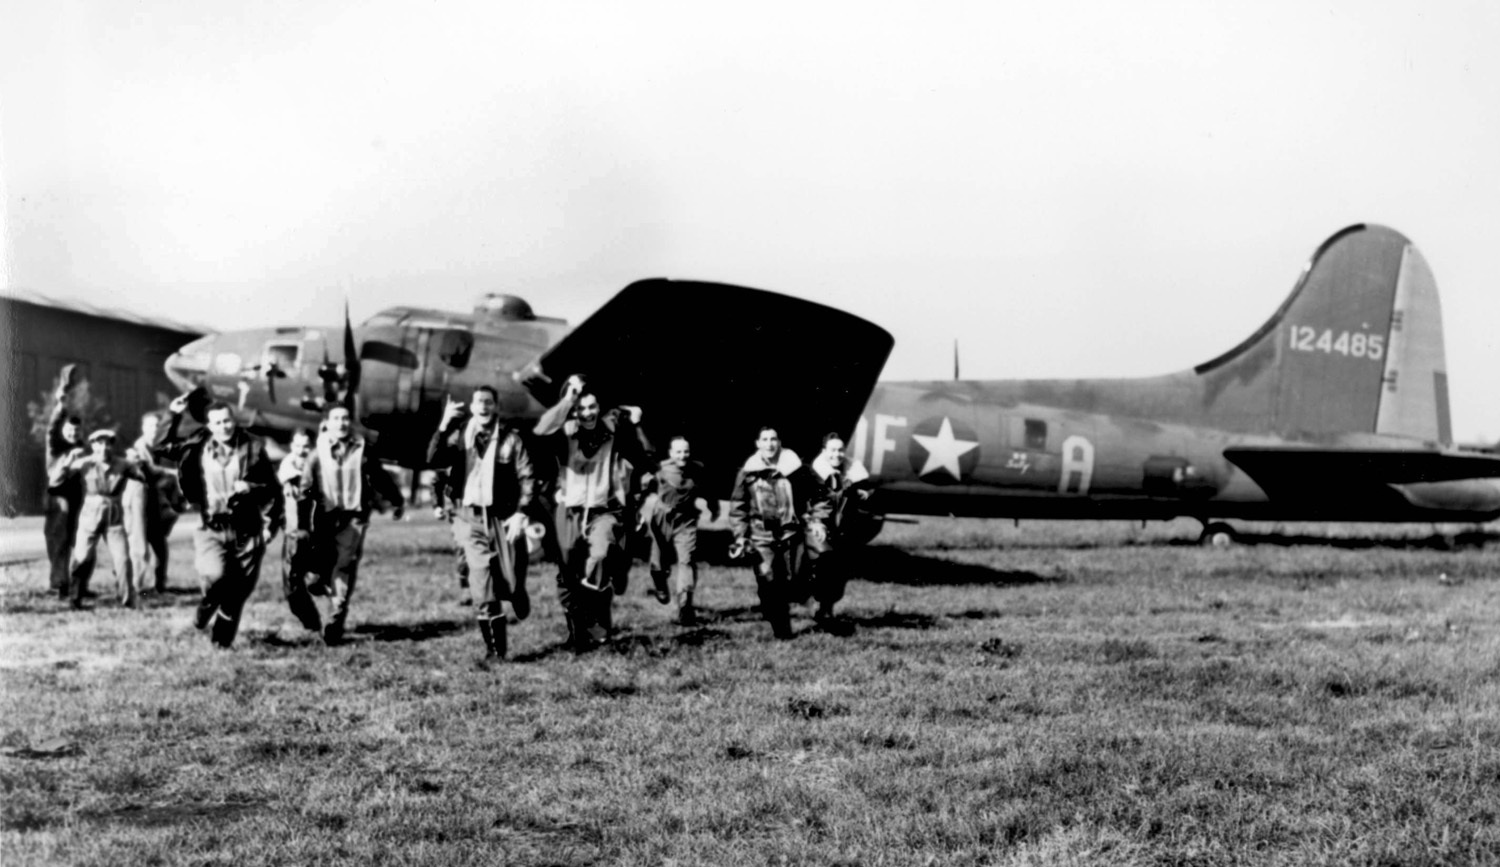 ﻿The crew of Memphis Belle return from their 25th mission in May 1943.